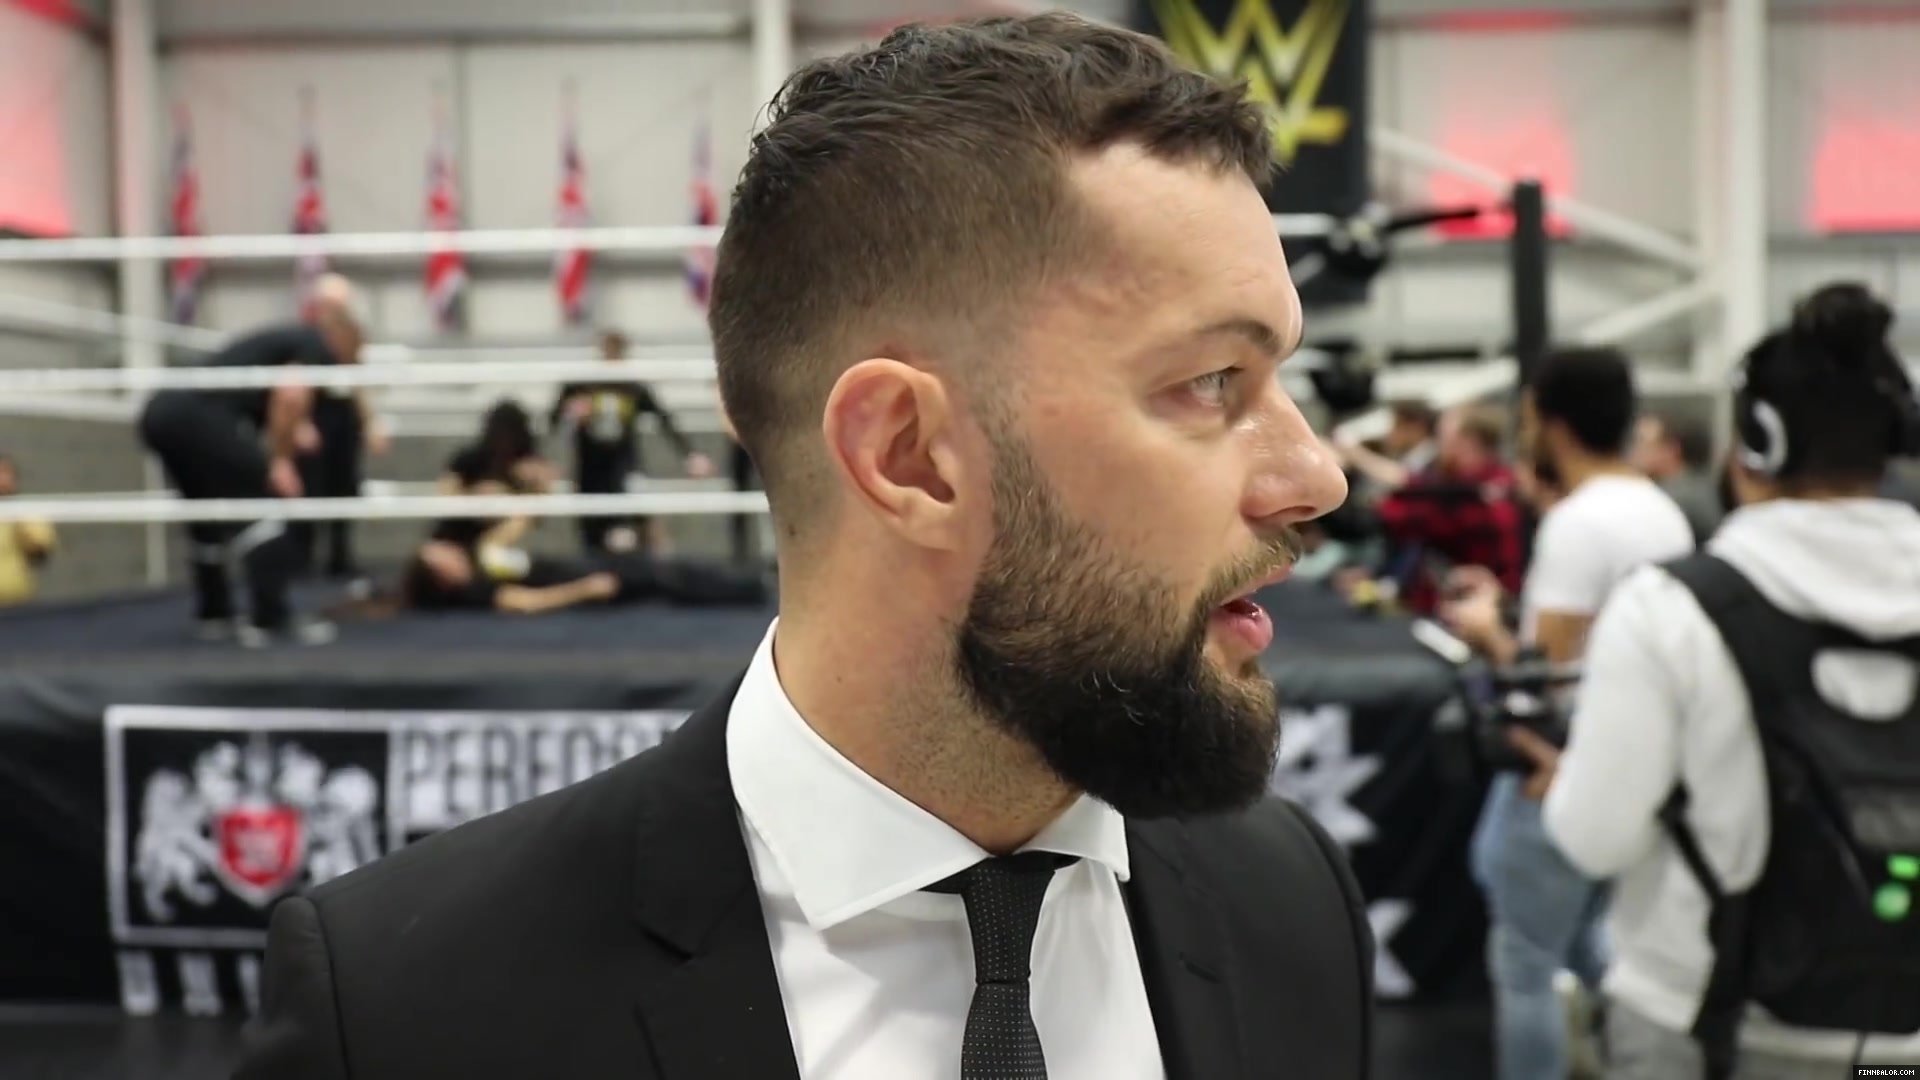 WWE_Superstar_FINN_BALOR_joins_MOUSTACHE_MOUNTAIN_at_the_opening_of_the_NXT_UK_PC_143.jpg